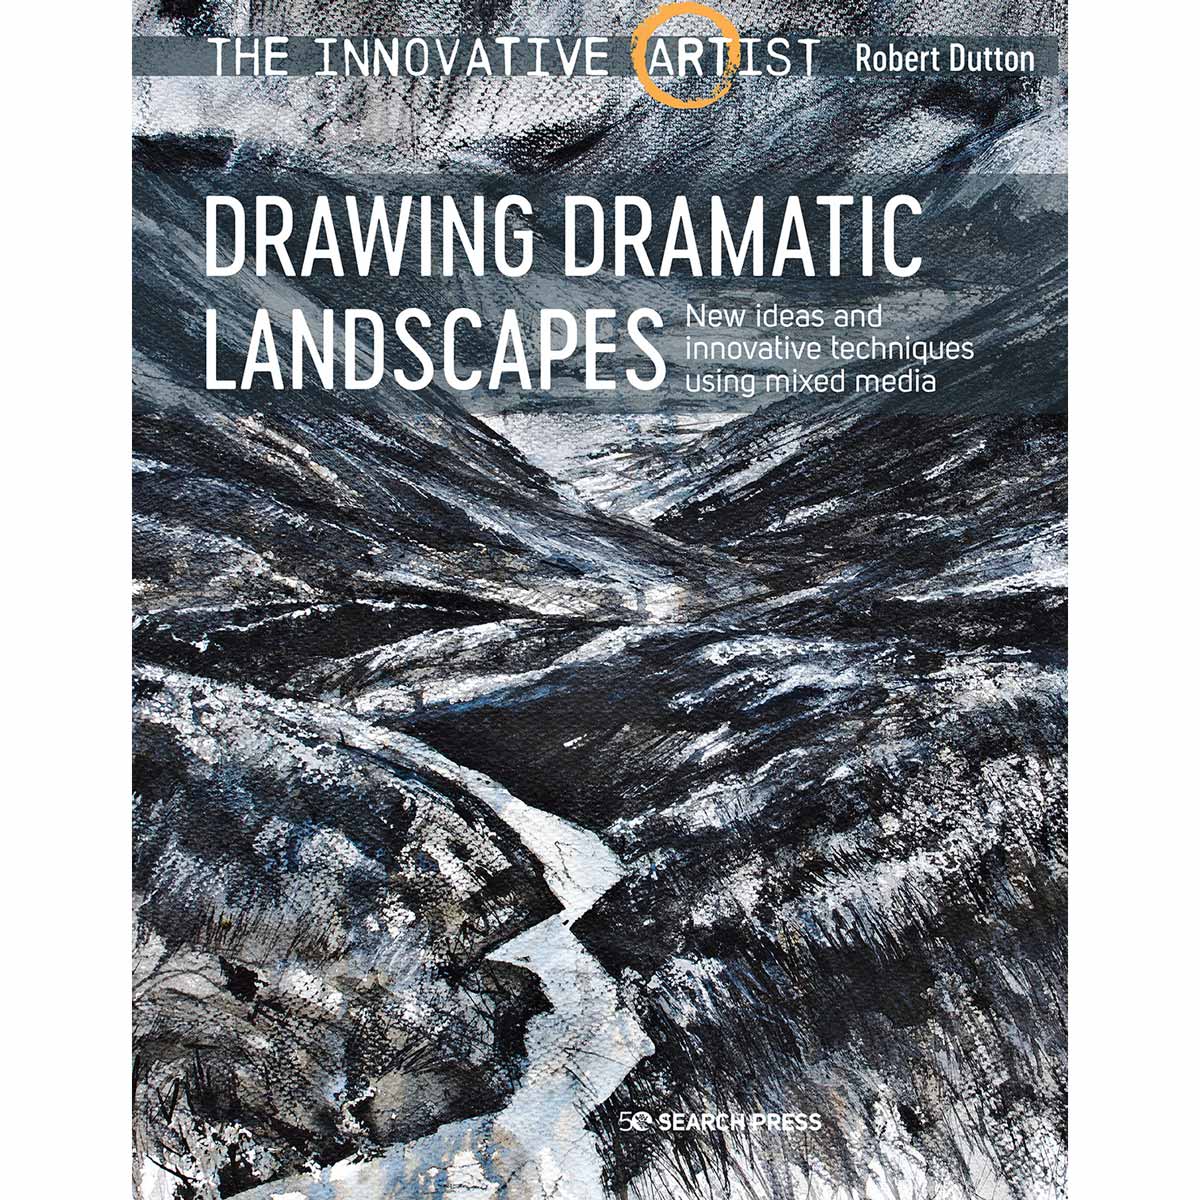 Search Press Books - Drawing Dramatic Landscapes